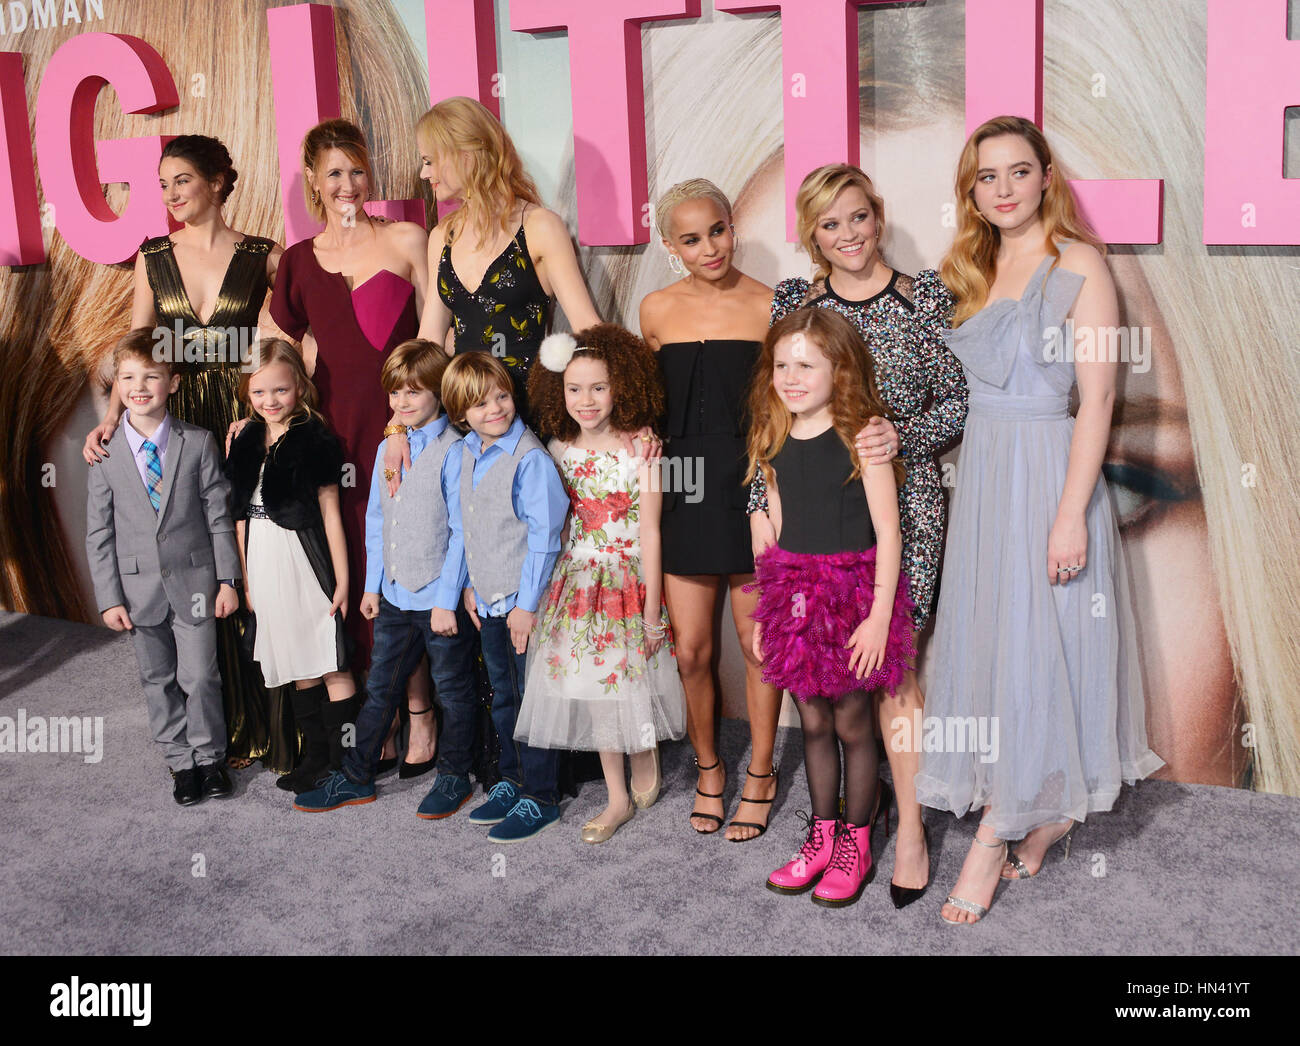 Los Angeles, USA. 07th Feb, 2017. Shailene Woodley, Laura Dern, Nicole Kidman, Zoe Kravitz, Reese Witherspoon, Kathryn Newton 058 arriving at the Big Little Lies premiere at the TCL Chinese Theatre in Los Angeles. February 7, 2017. Credit: Tsuni/USA/Alamy Live News Stock Photo